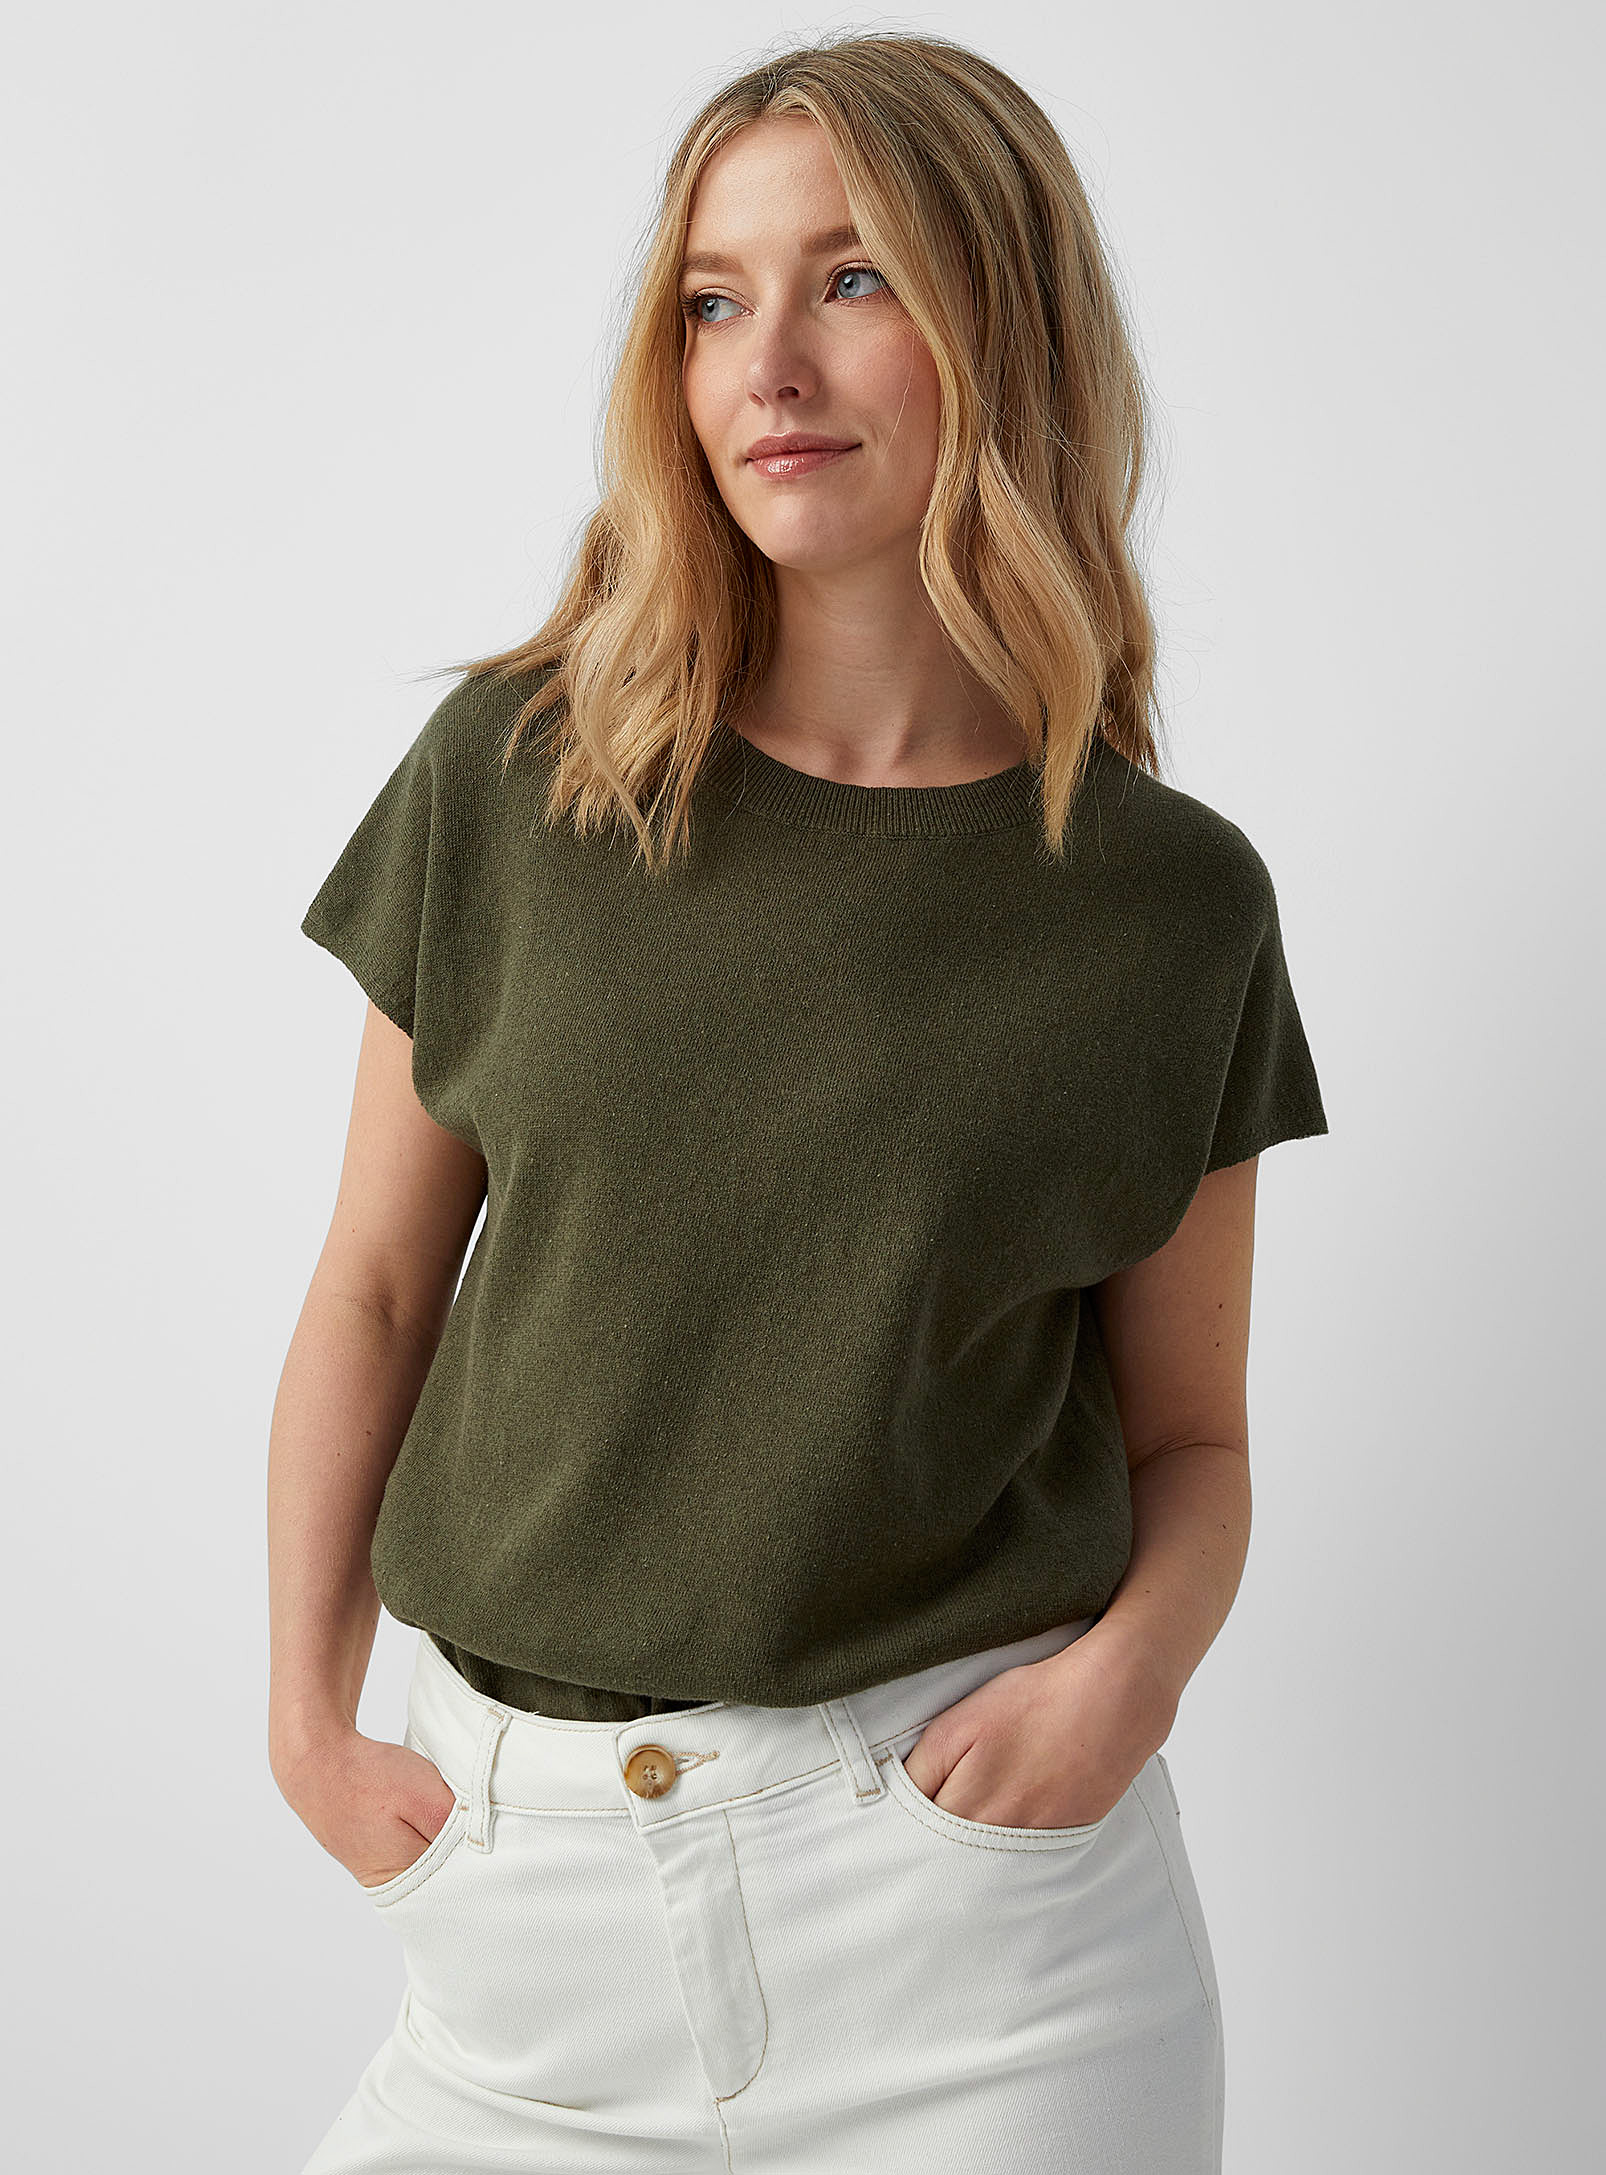 Contemporaine Cap Sleeves Lightweight Sweater In Mossy Green